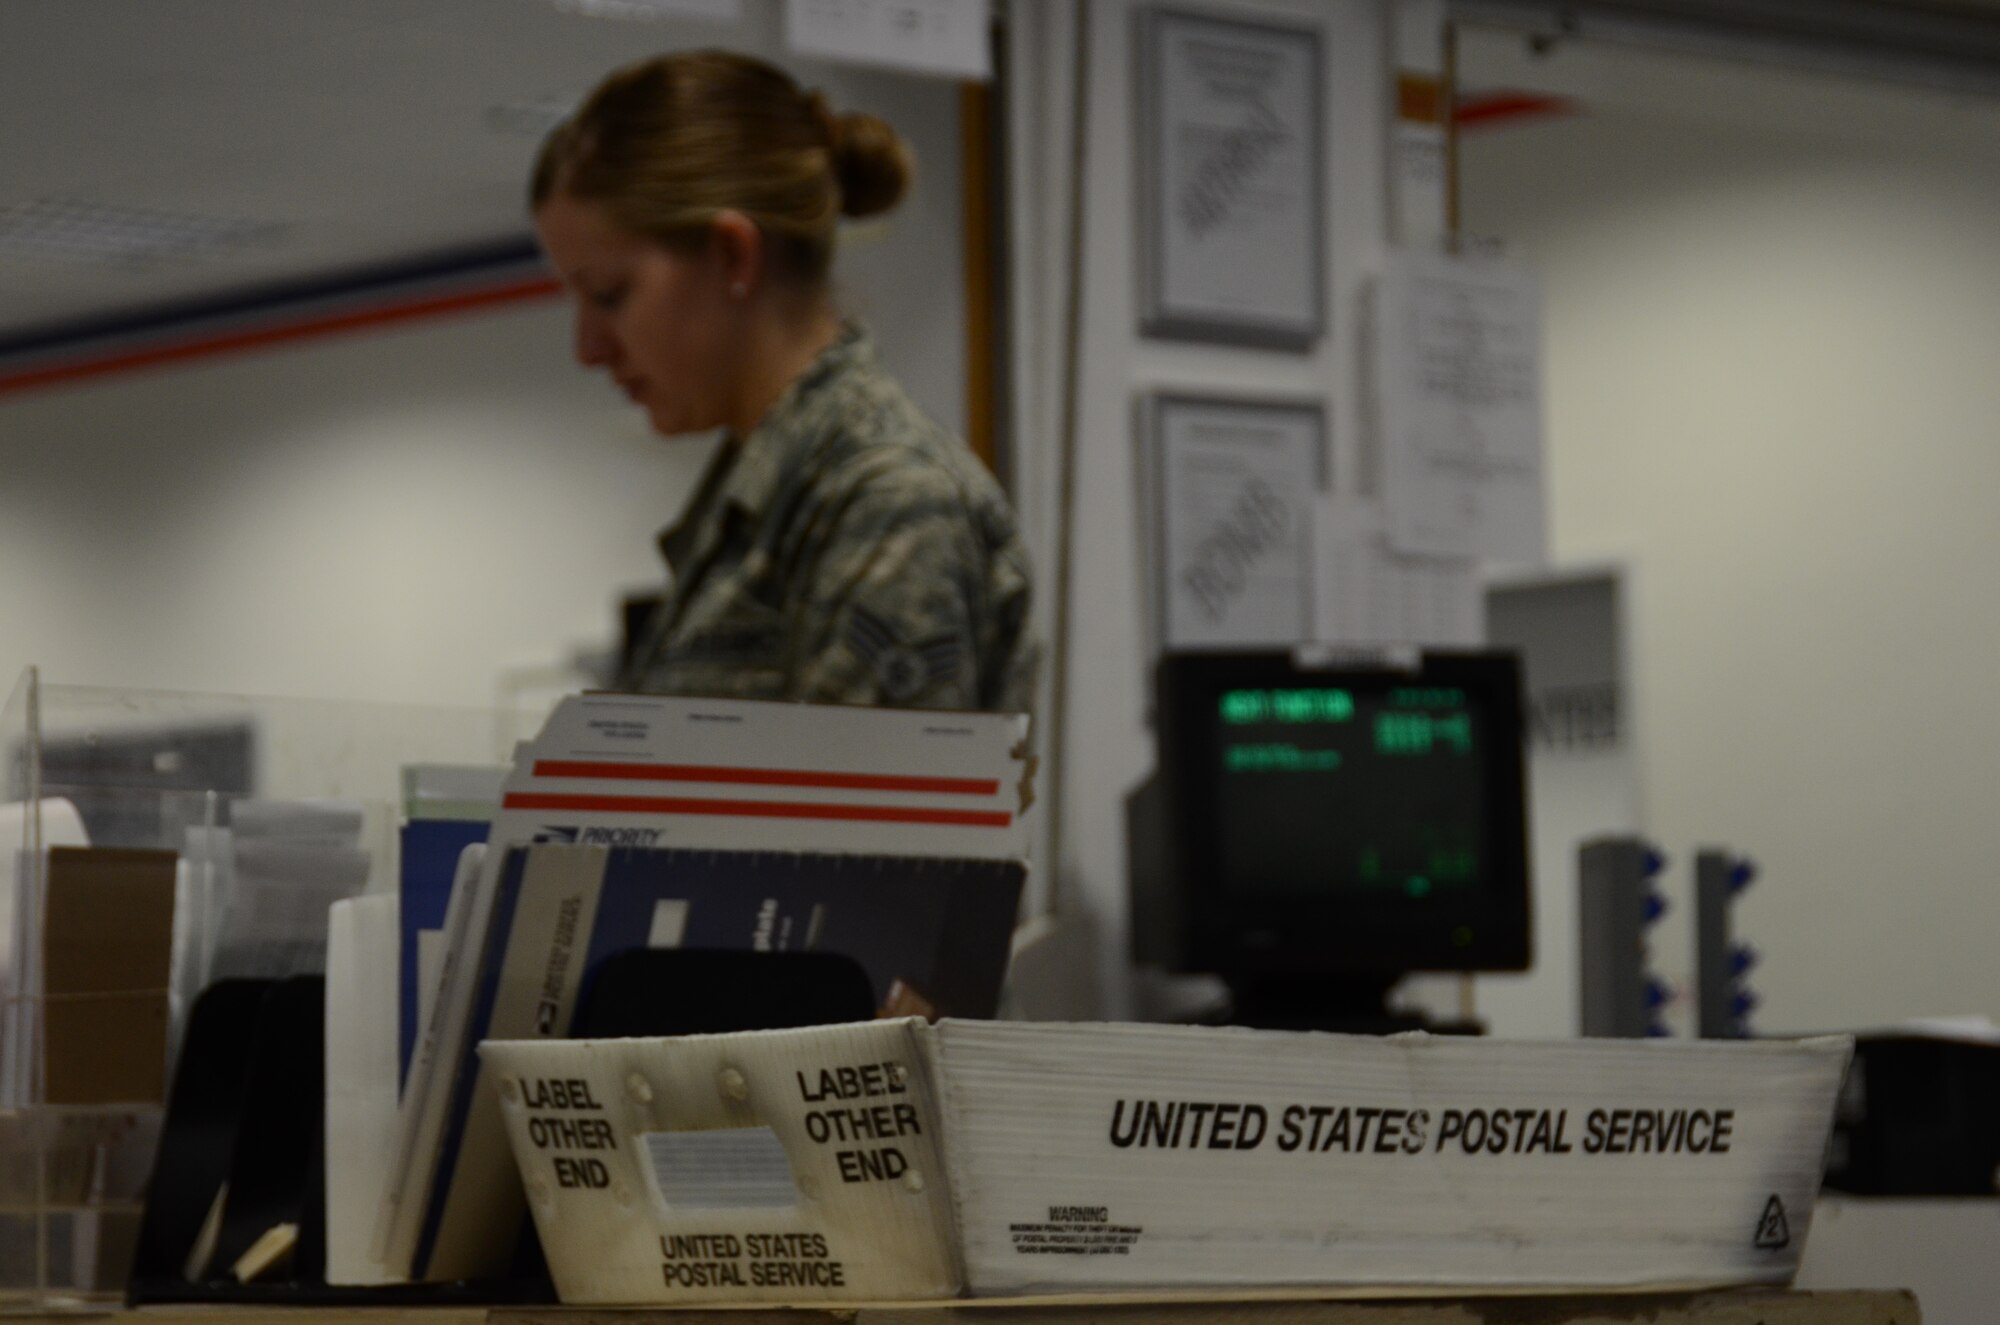 An 86th Communications Squadron Airman works in the finance section at the North Side Post Office during a visit from United States Postal Service inspectors April 19, 2013, Ramstein Air Base, Germany. The USPS inspectors visited the North Side Post Office to observe the day-to-day functions of the Department of Defense's largest postal operation. (U.S. Air Force photo / 2nd Lt. Kay M. Nissen)
